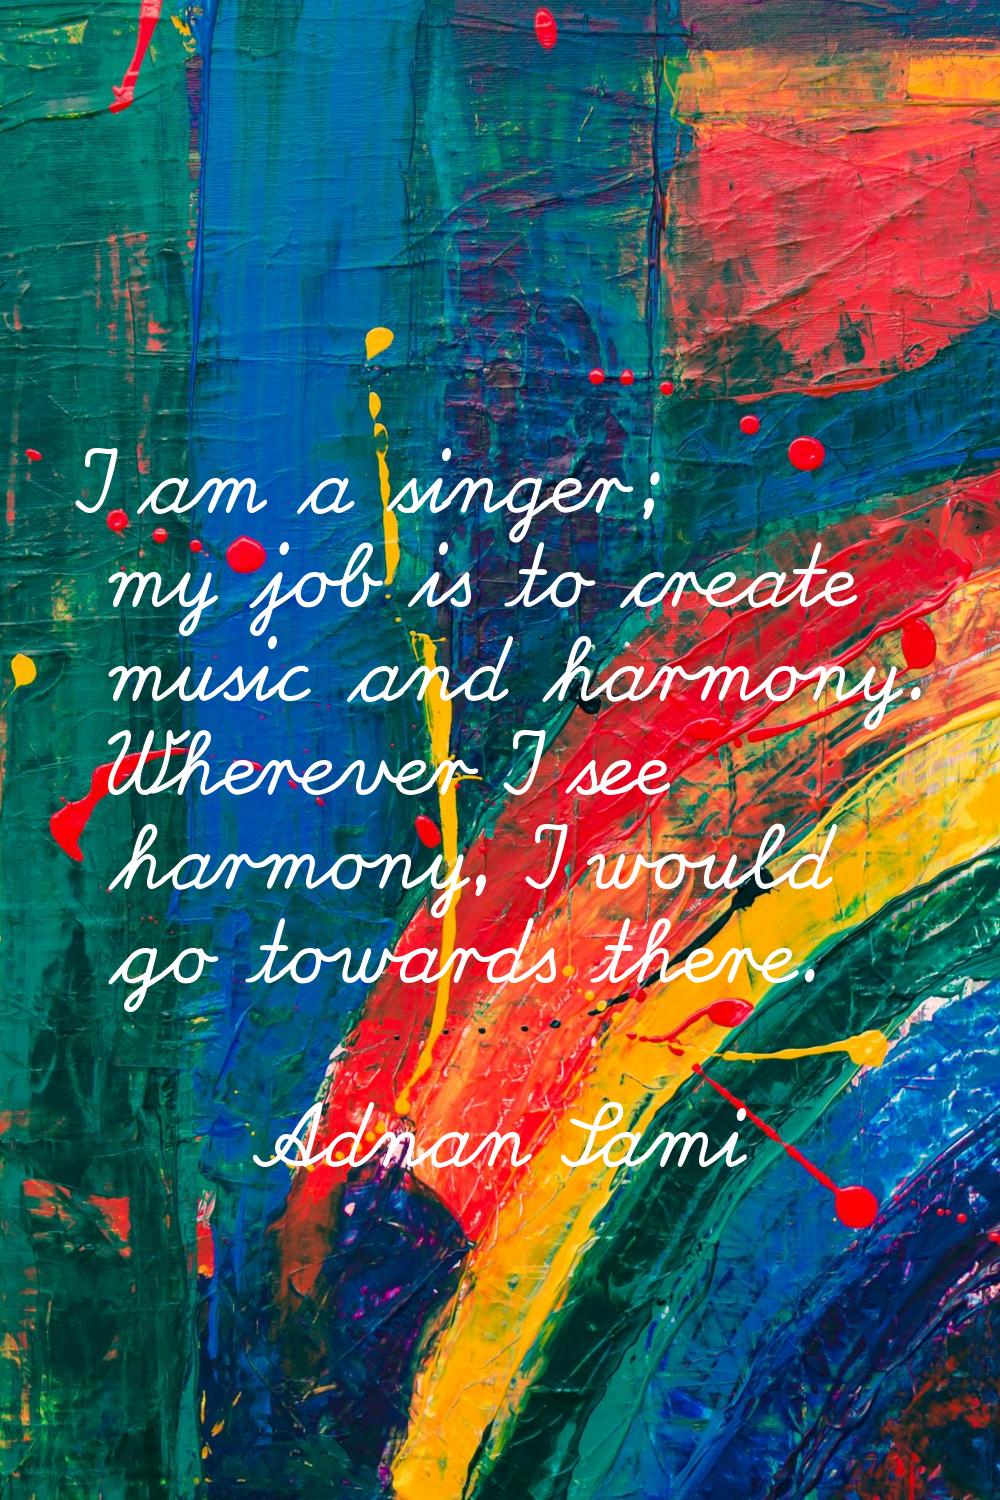 I am a singer; my job is to create music and harmony. Wherever I see harmony, I would go towards th